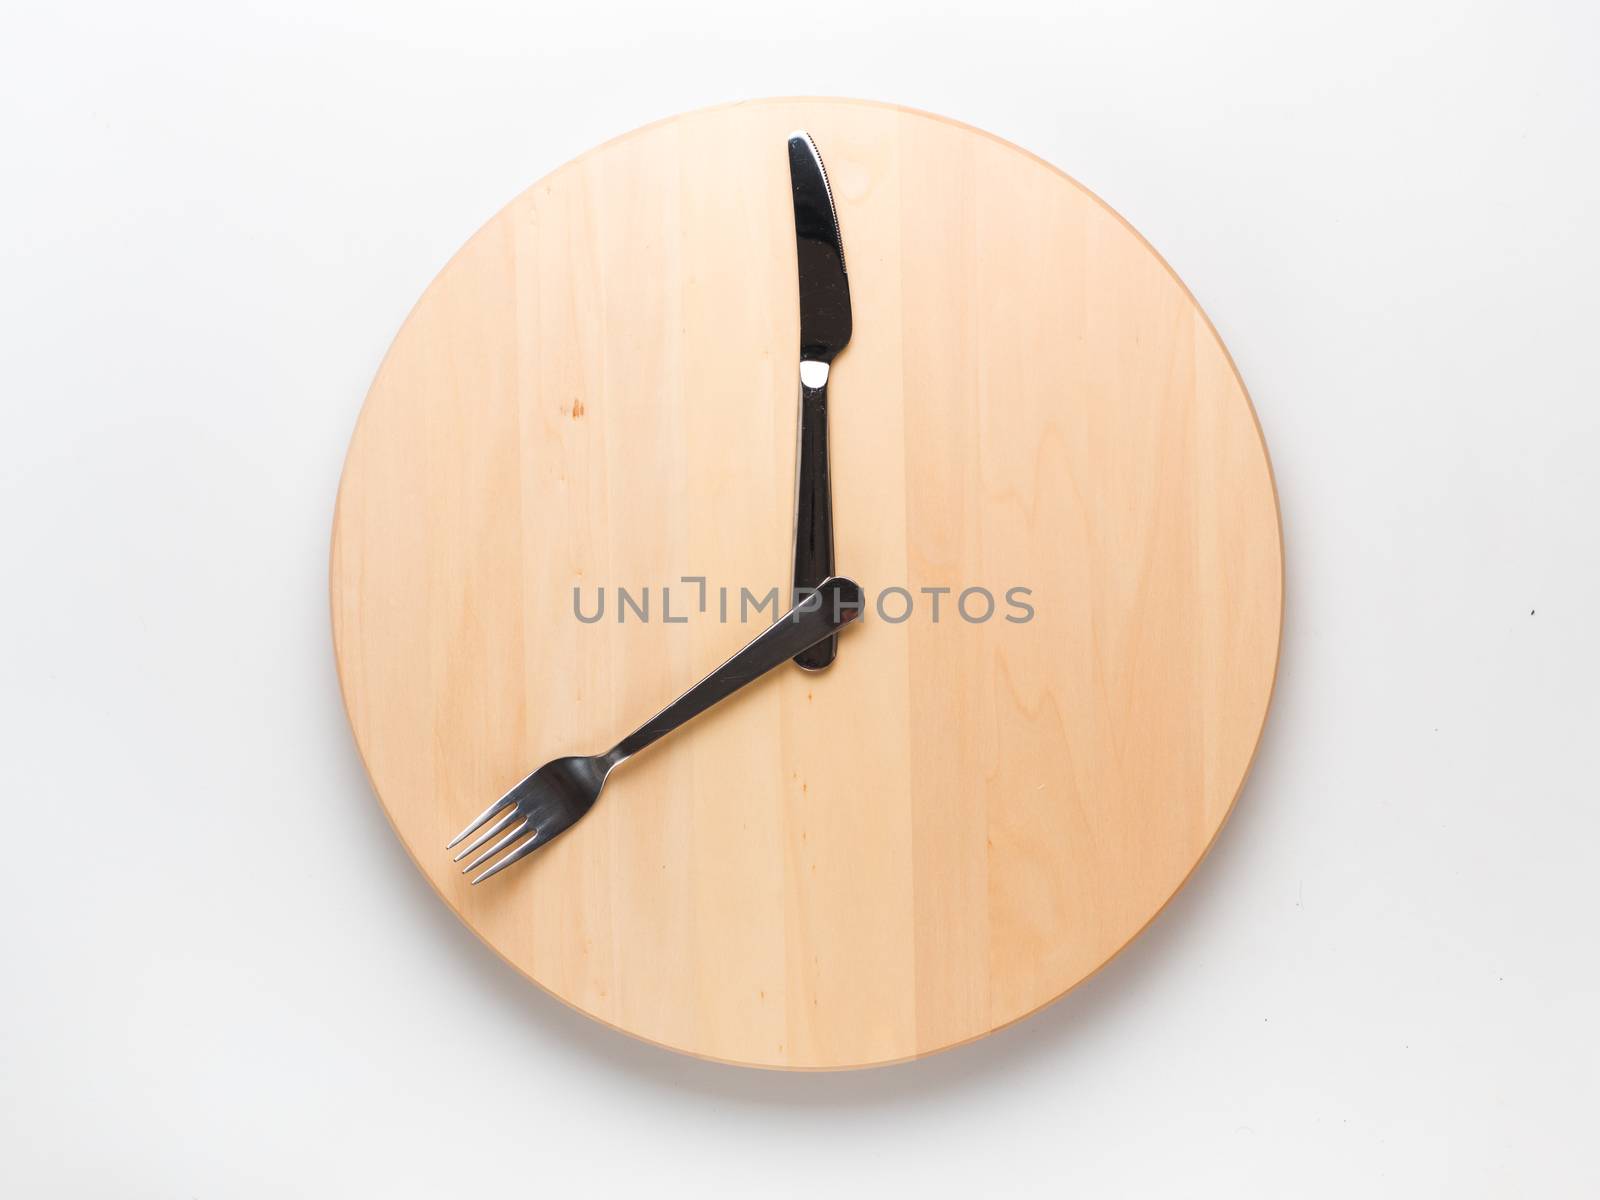 Intermittent fasting and skip breakfast concept - empty wooden round tray or trencher with cutlery as clock hands on white background. Eight hour feeding window concept or breakfast time concept.